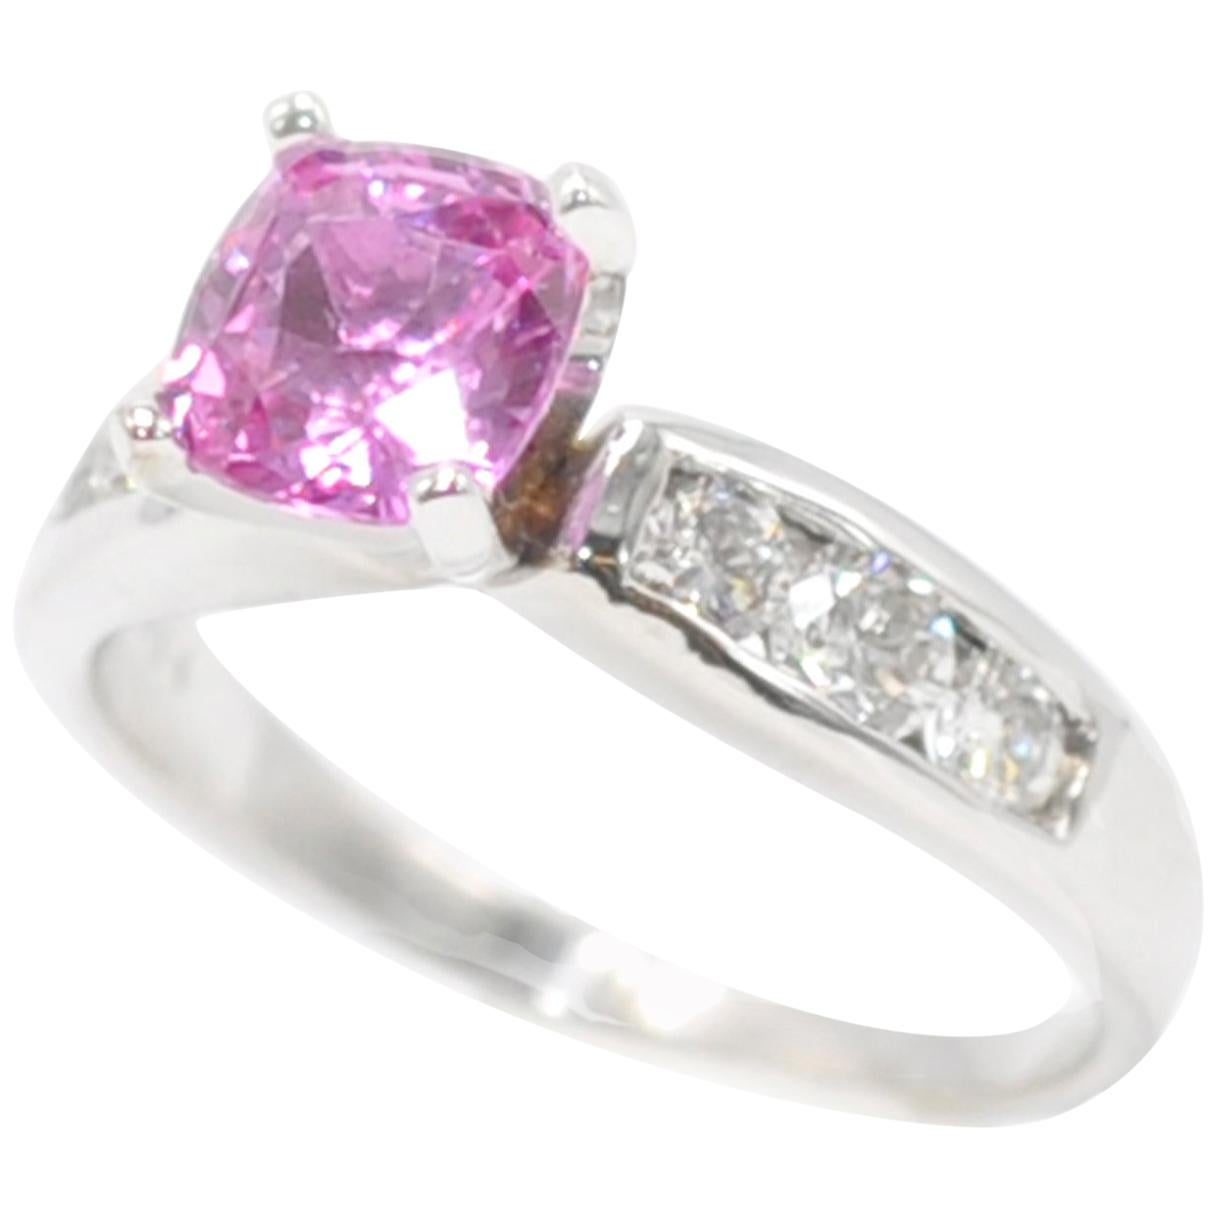 White Gold Cushion Cut Pink Sapphire and Diamond Ring